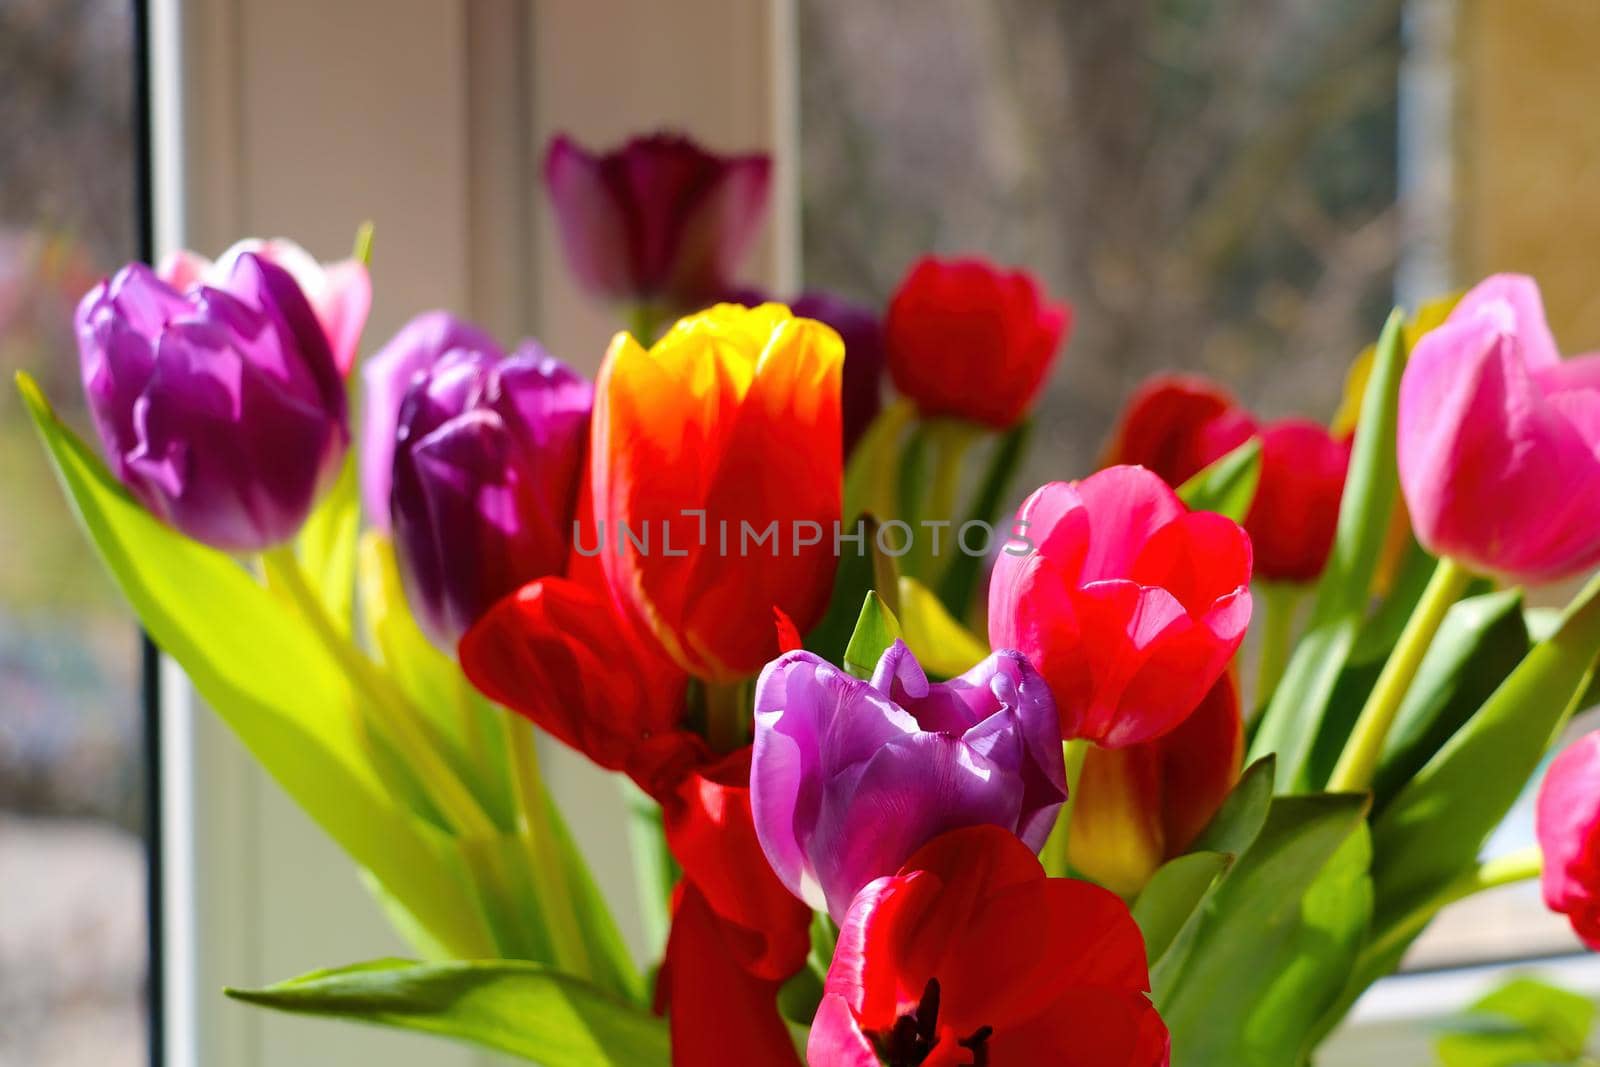 There is a bouquet of fragrant blooming tulips in a vase on the windowsill. by kip02kas